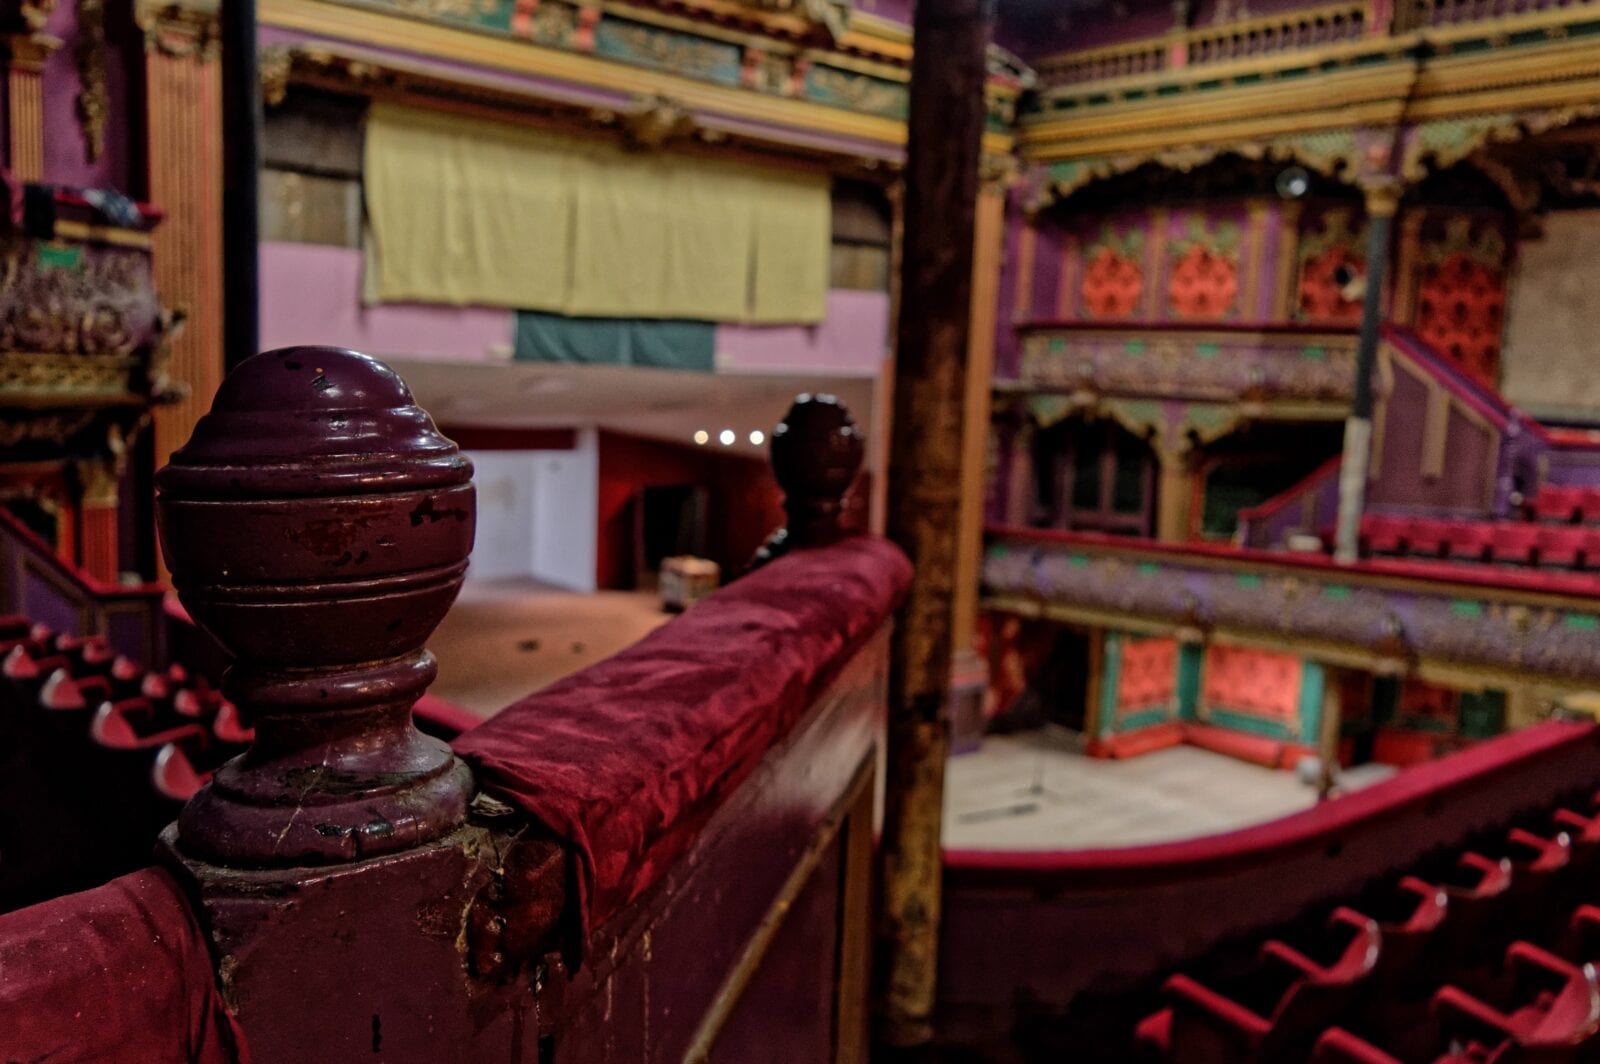 A Crowdfunder has been launched to save the Hulme Hippodrome from redevelopment, The Manc